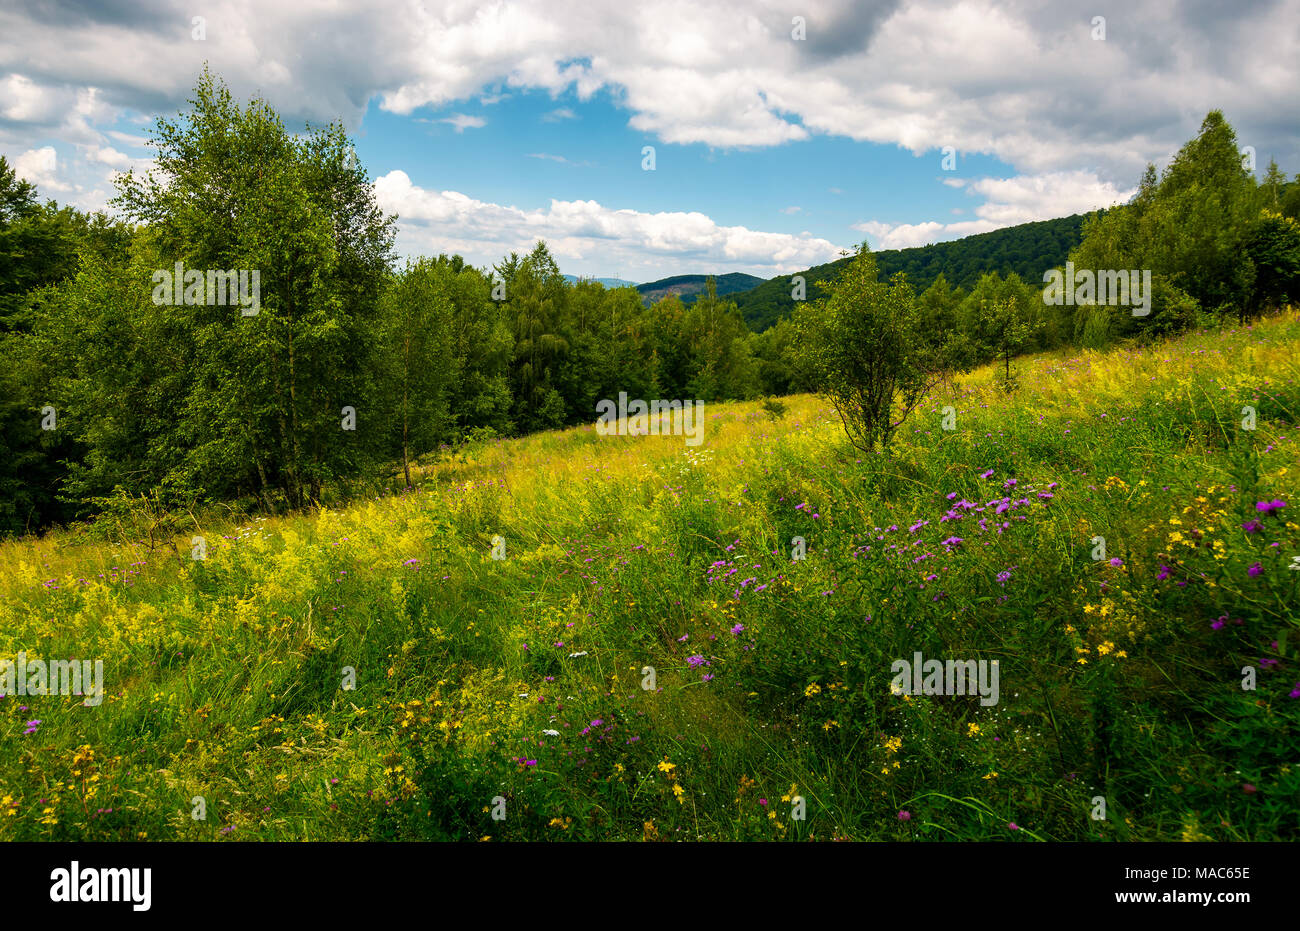 meadow with wild herbs among the forest in summer. beautiful nature scenery in mountains on a cloudy day Stock Photo